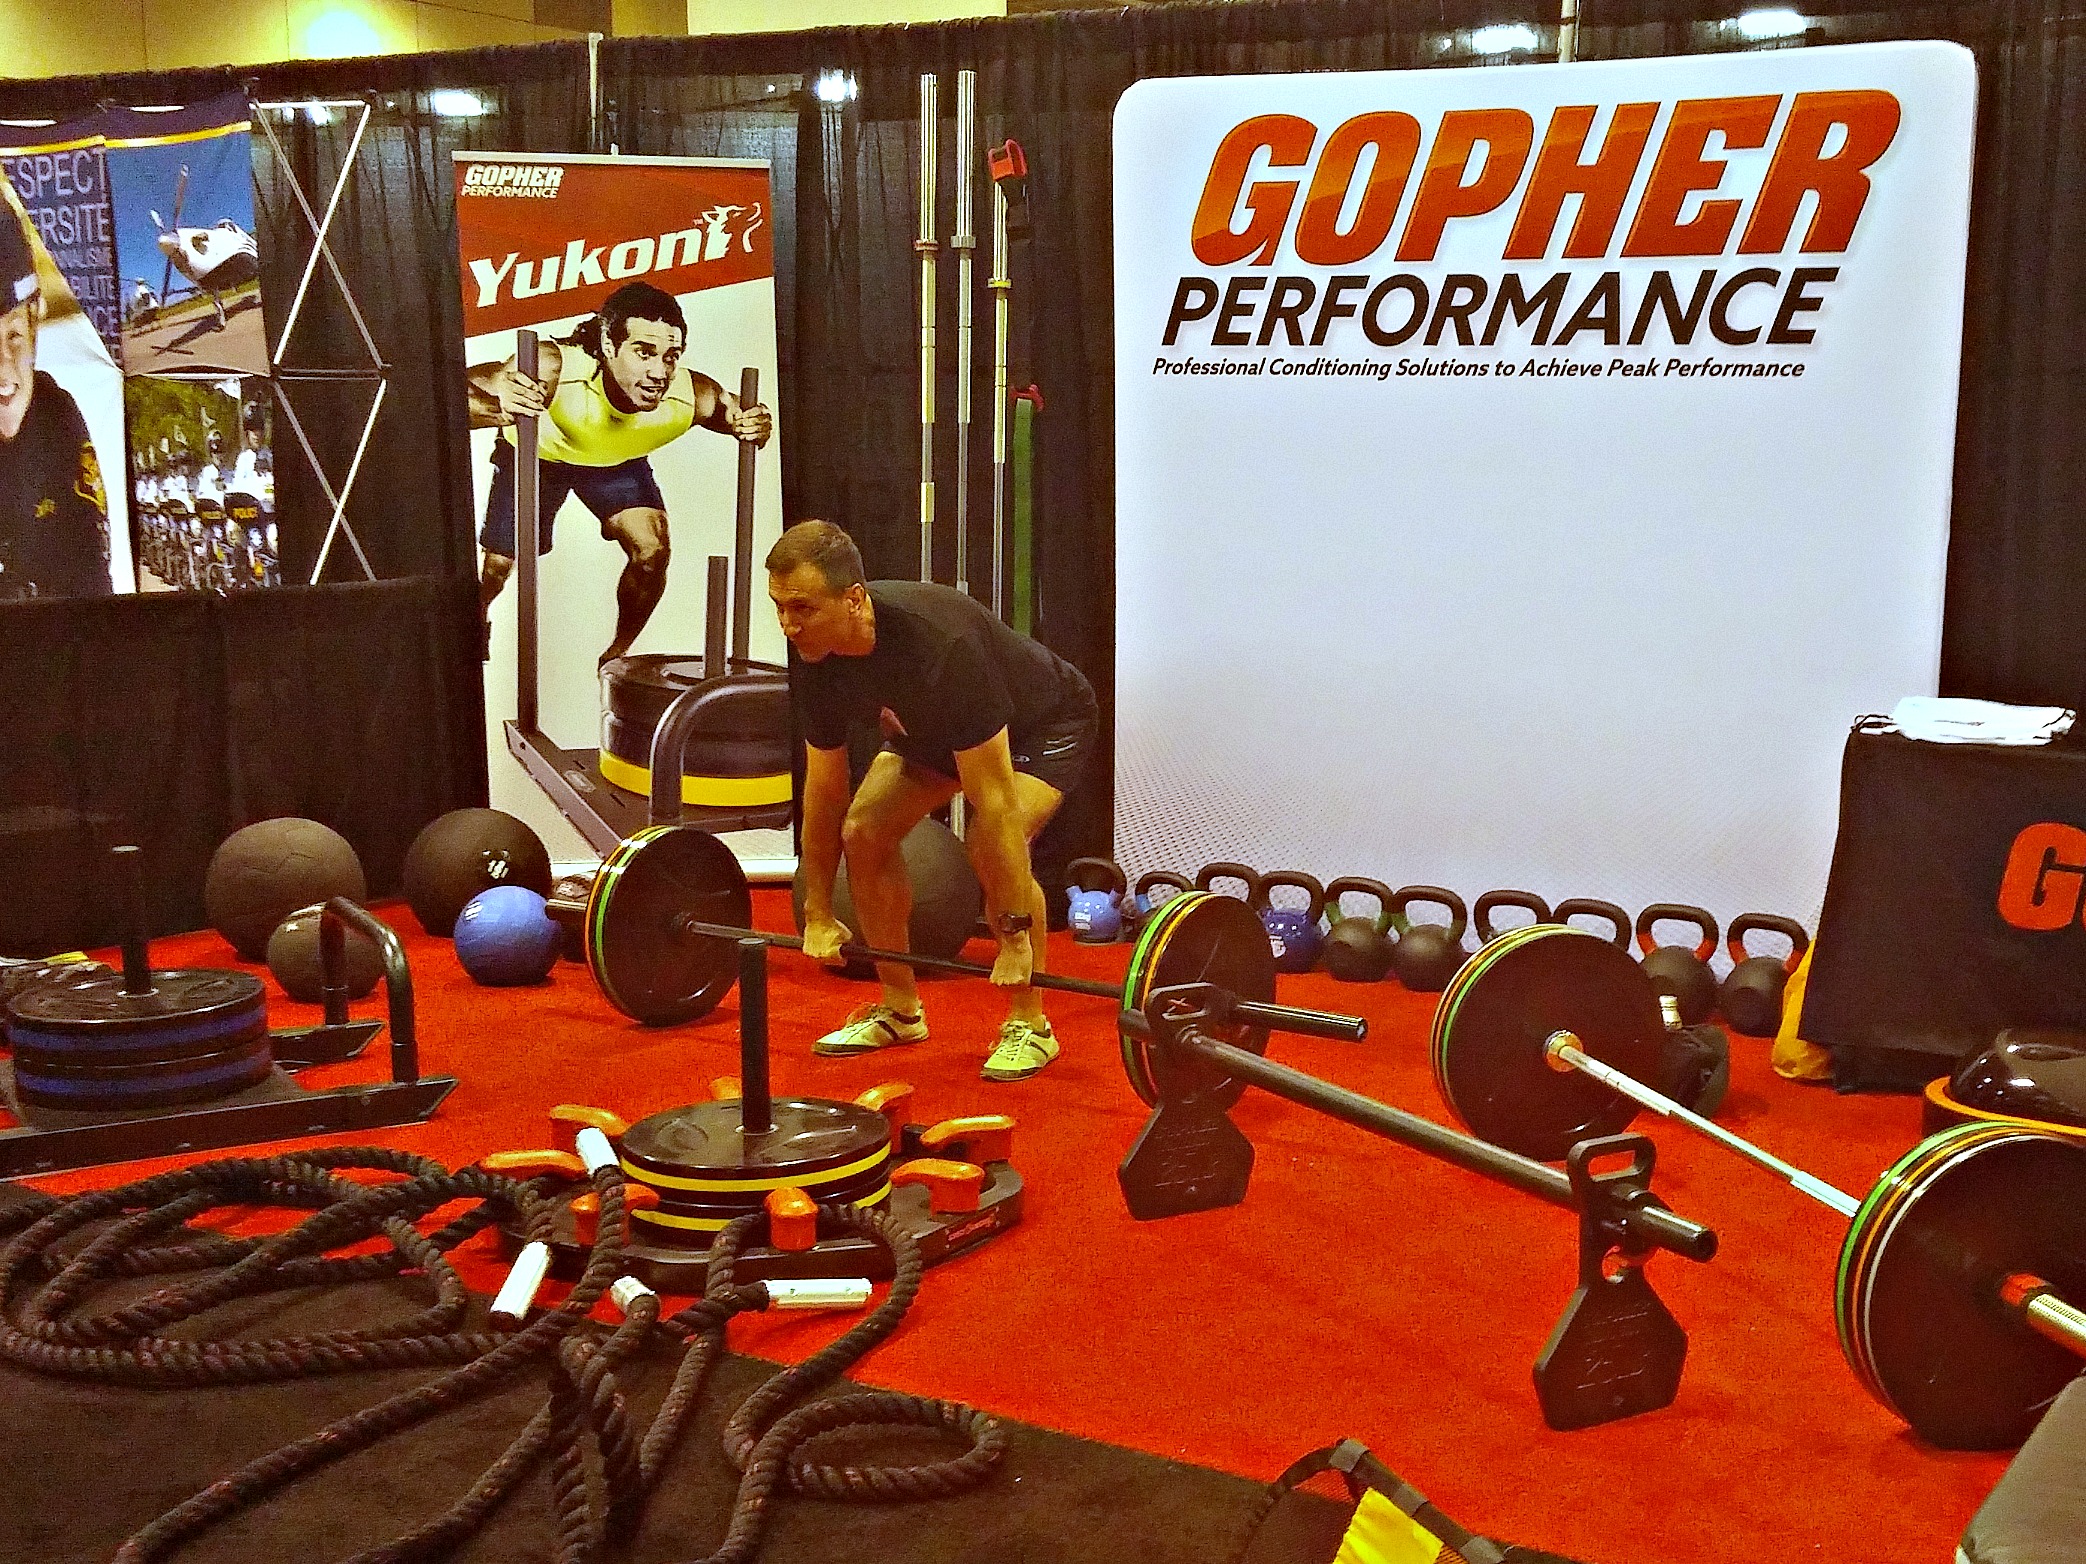 Demonstrator with Gopher Performance doing a deadlift